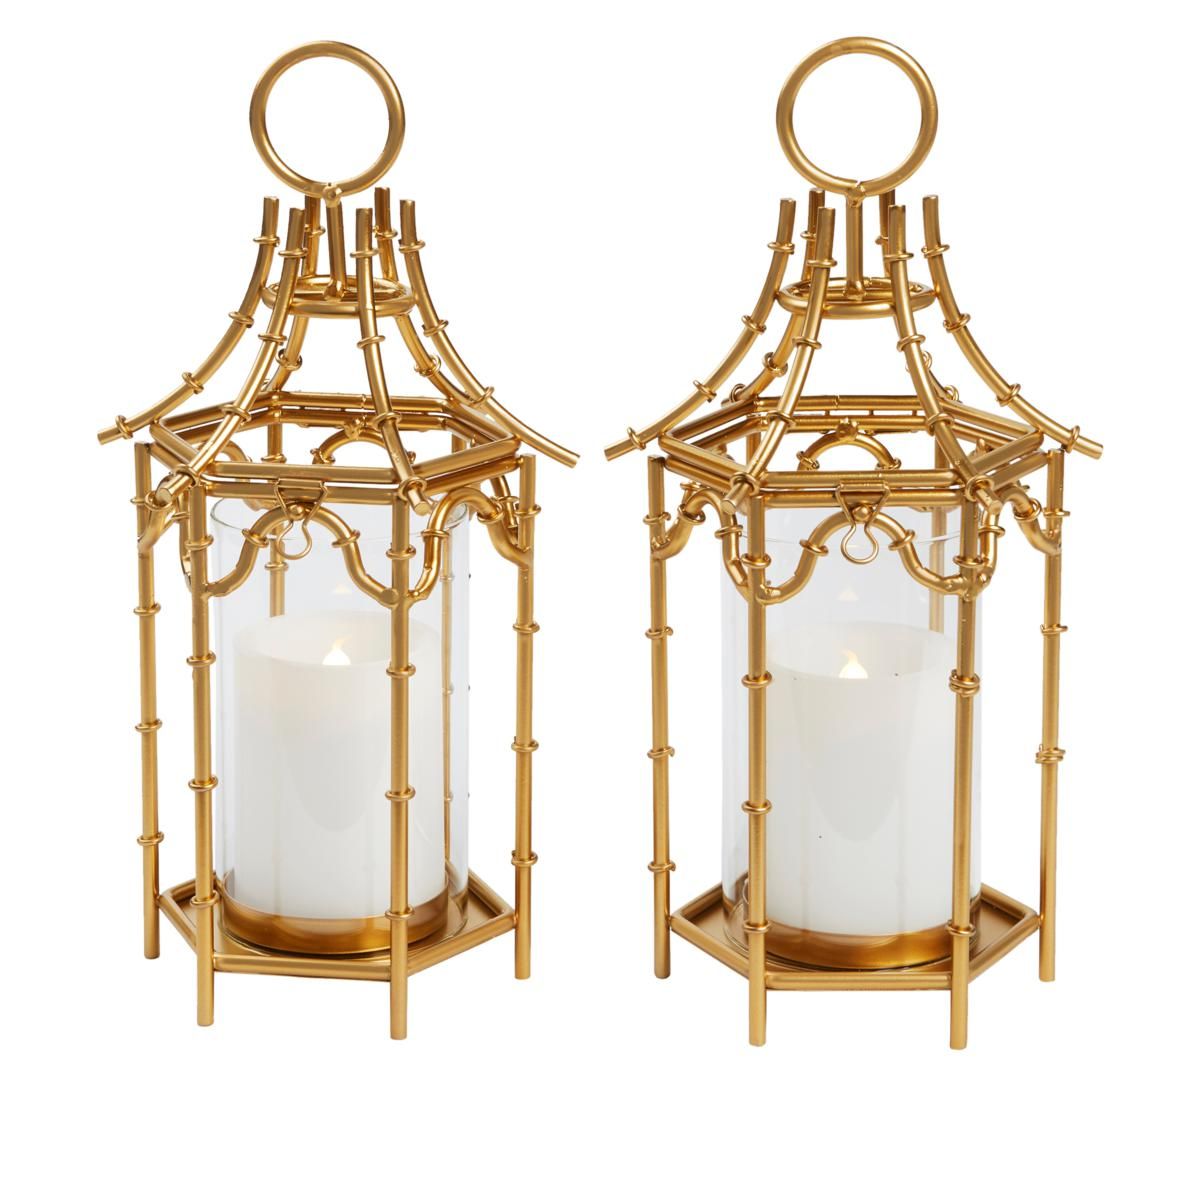 Patricia Altschul Set of 2 Pagoda Lanterns with Remote - 20131194 | HSN | HSN